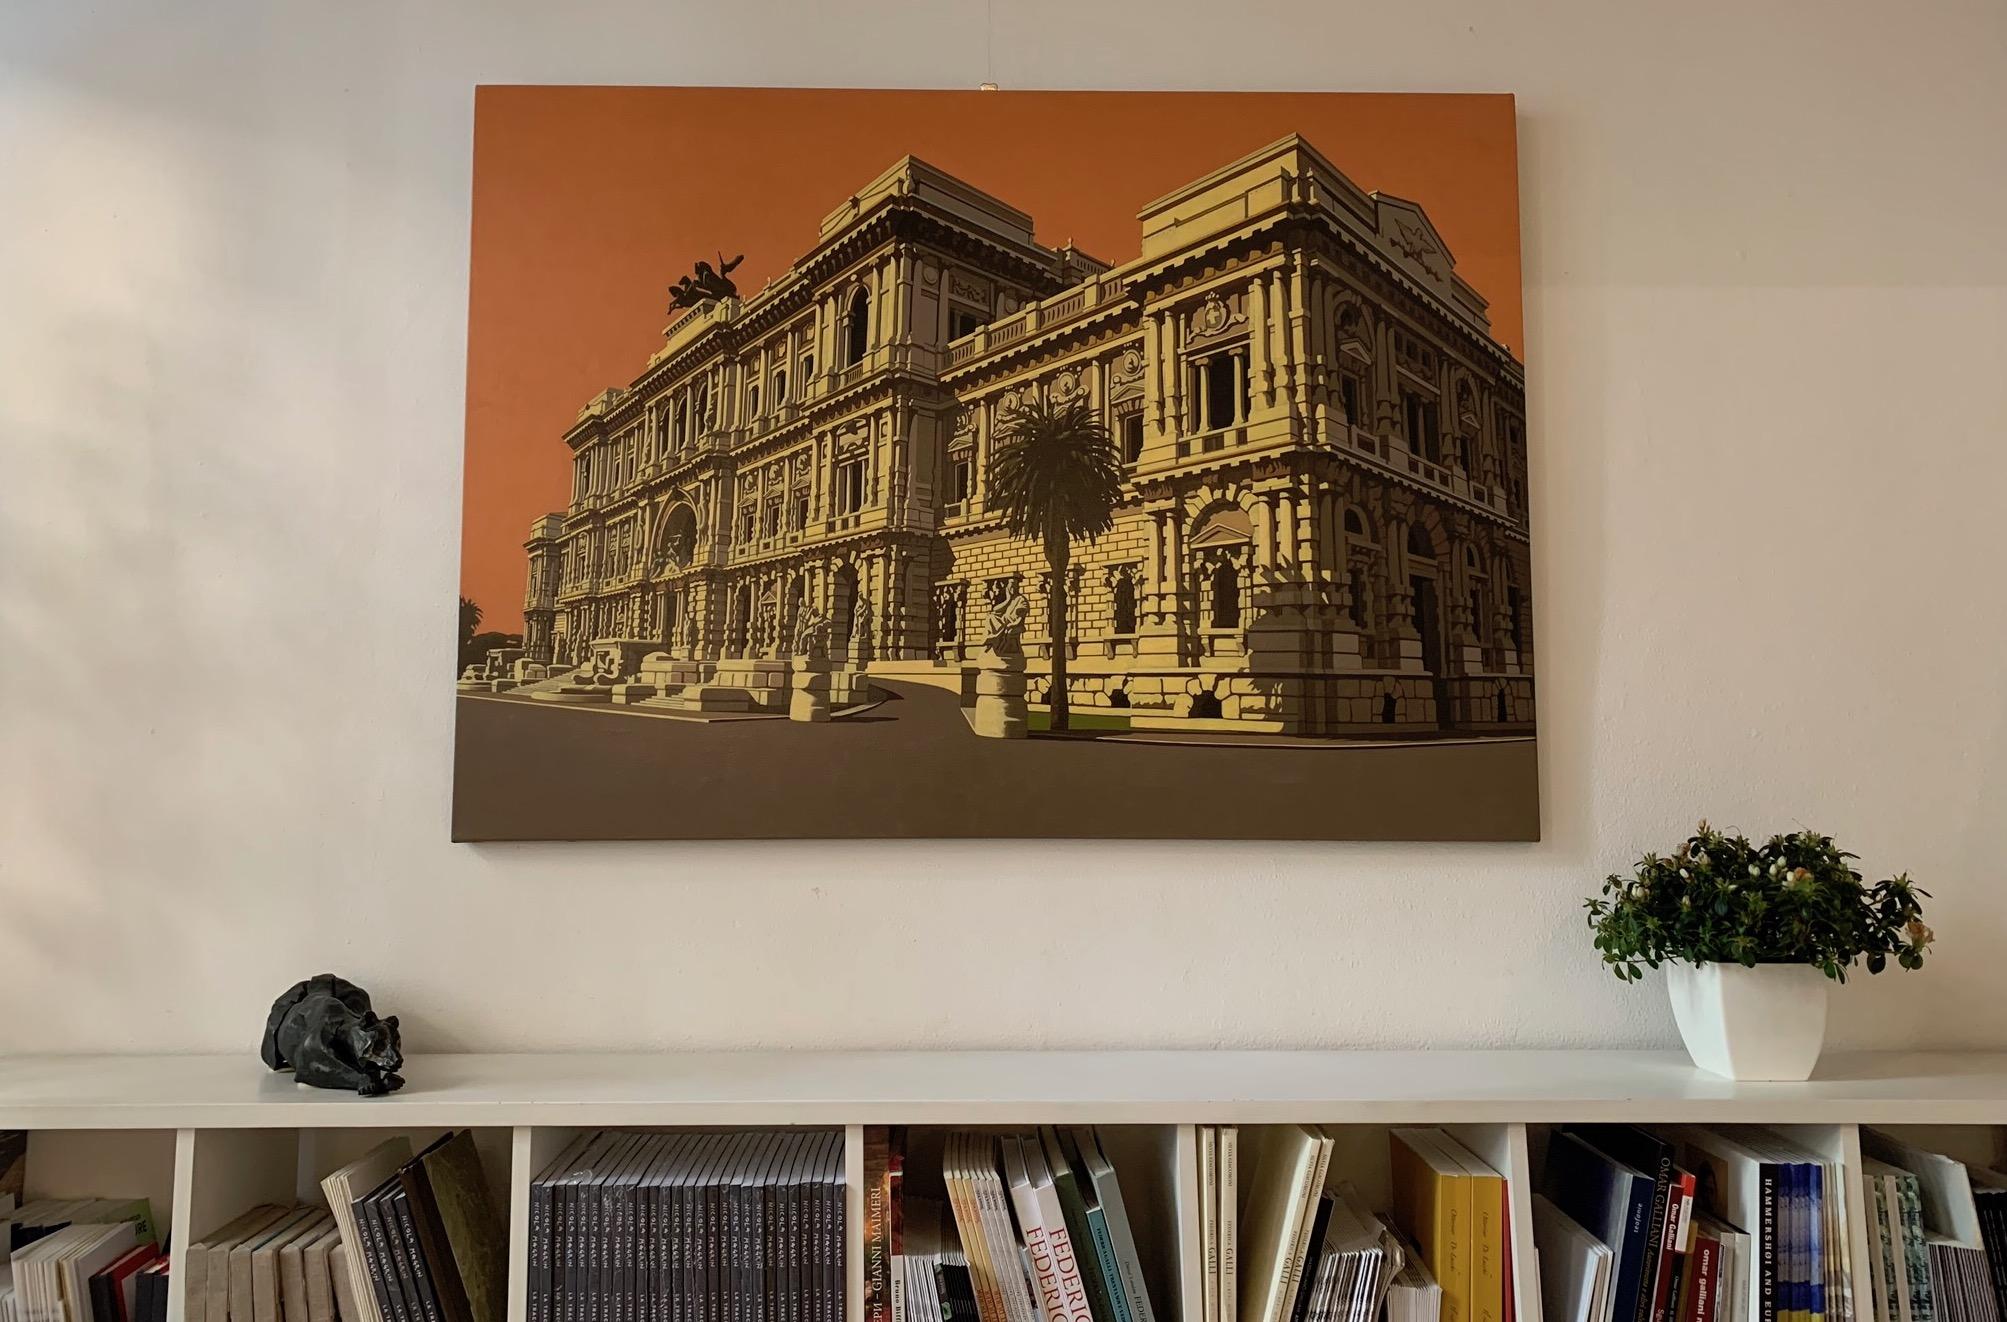 Rome hystorical palace, orange view by oil contemporary italian painter Reggio For Sale 2